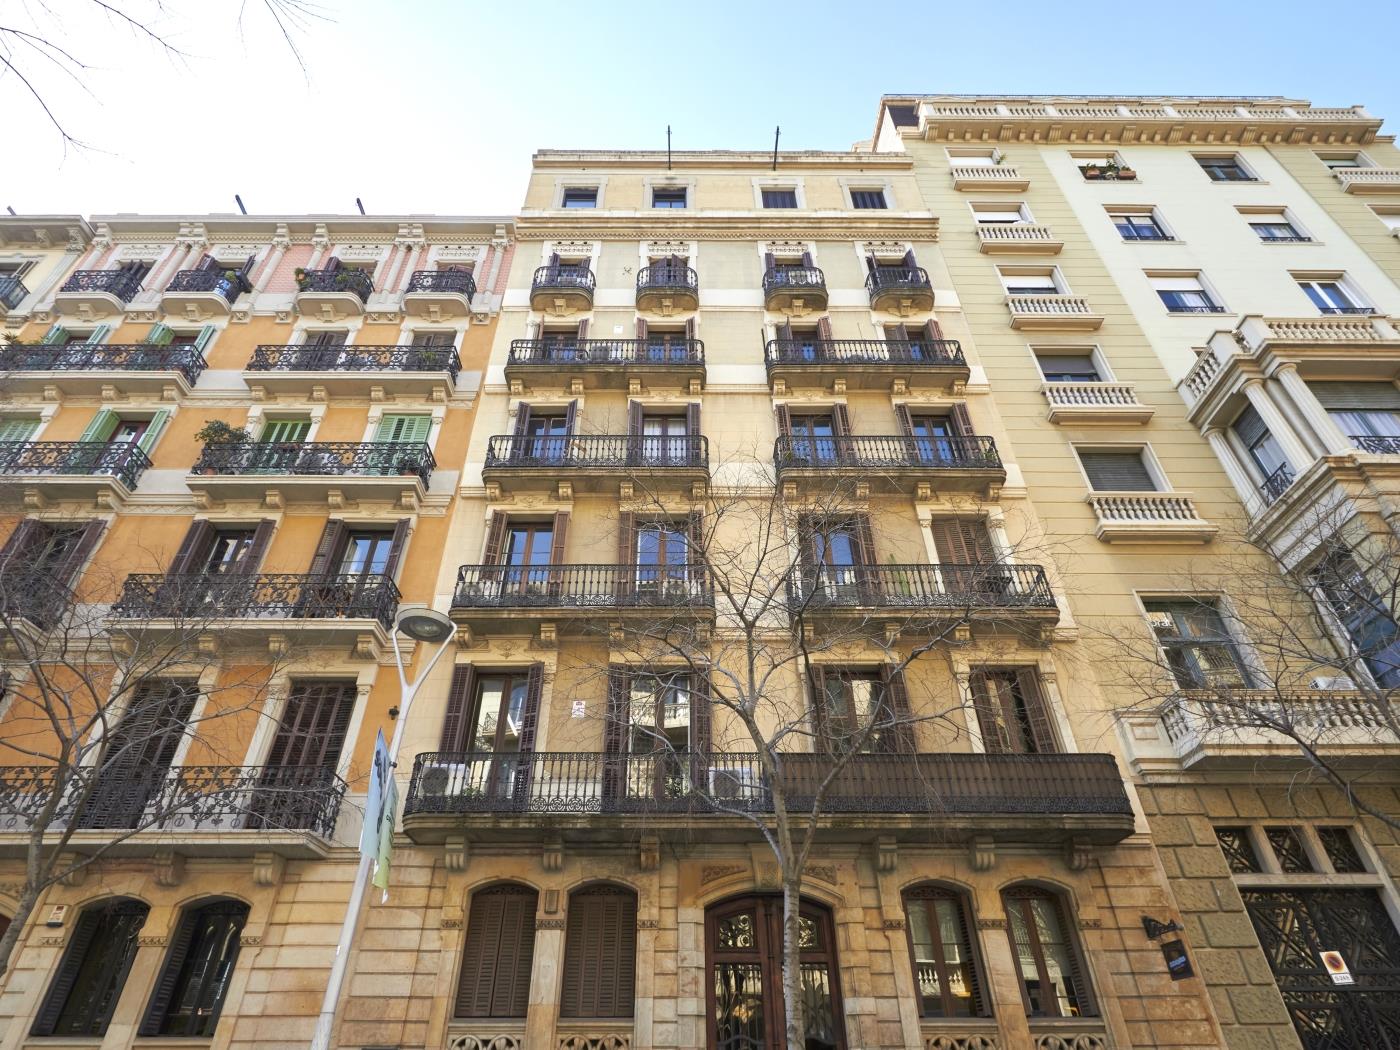 FOR SALE: Bright and renovated penthouse in the Eixample - Price 579.000 € - My Space Barcelona Apartments